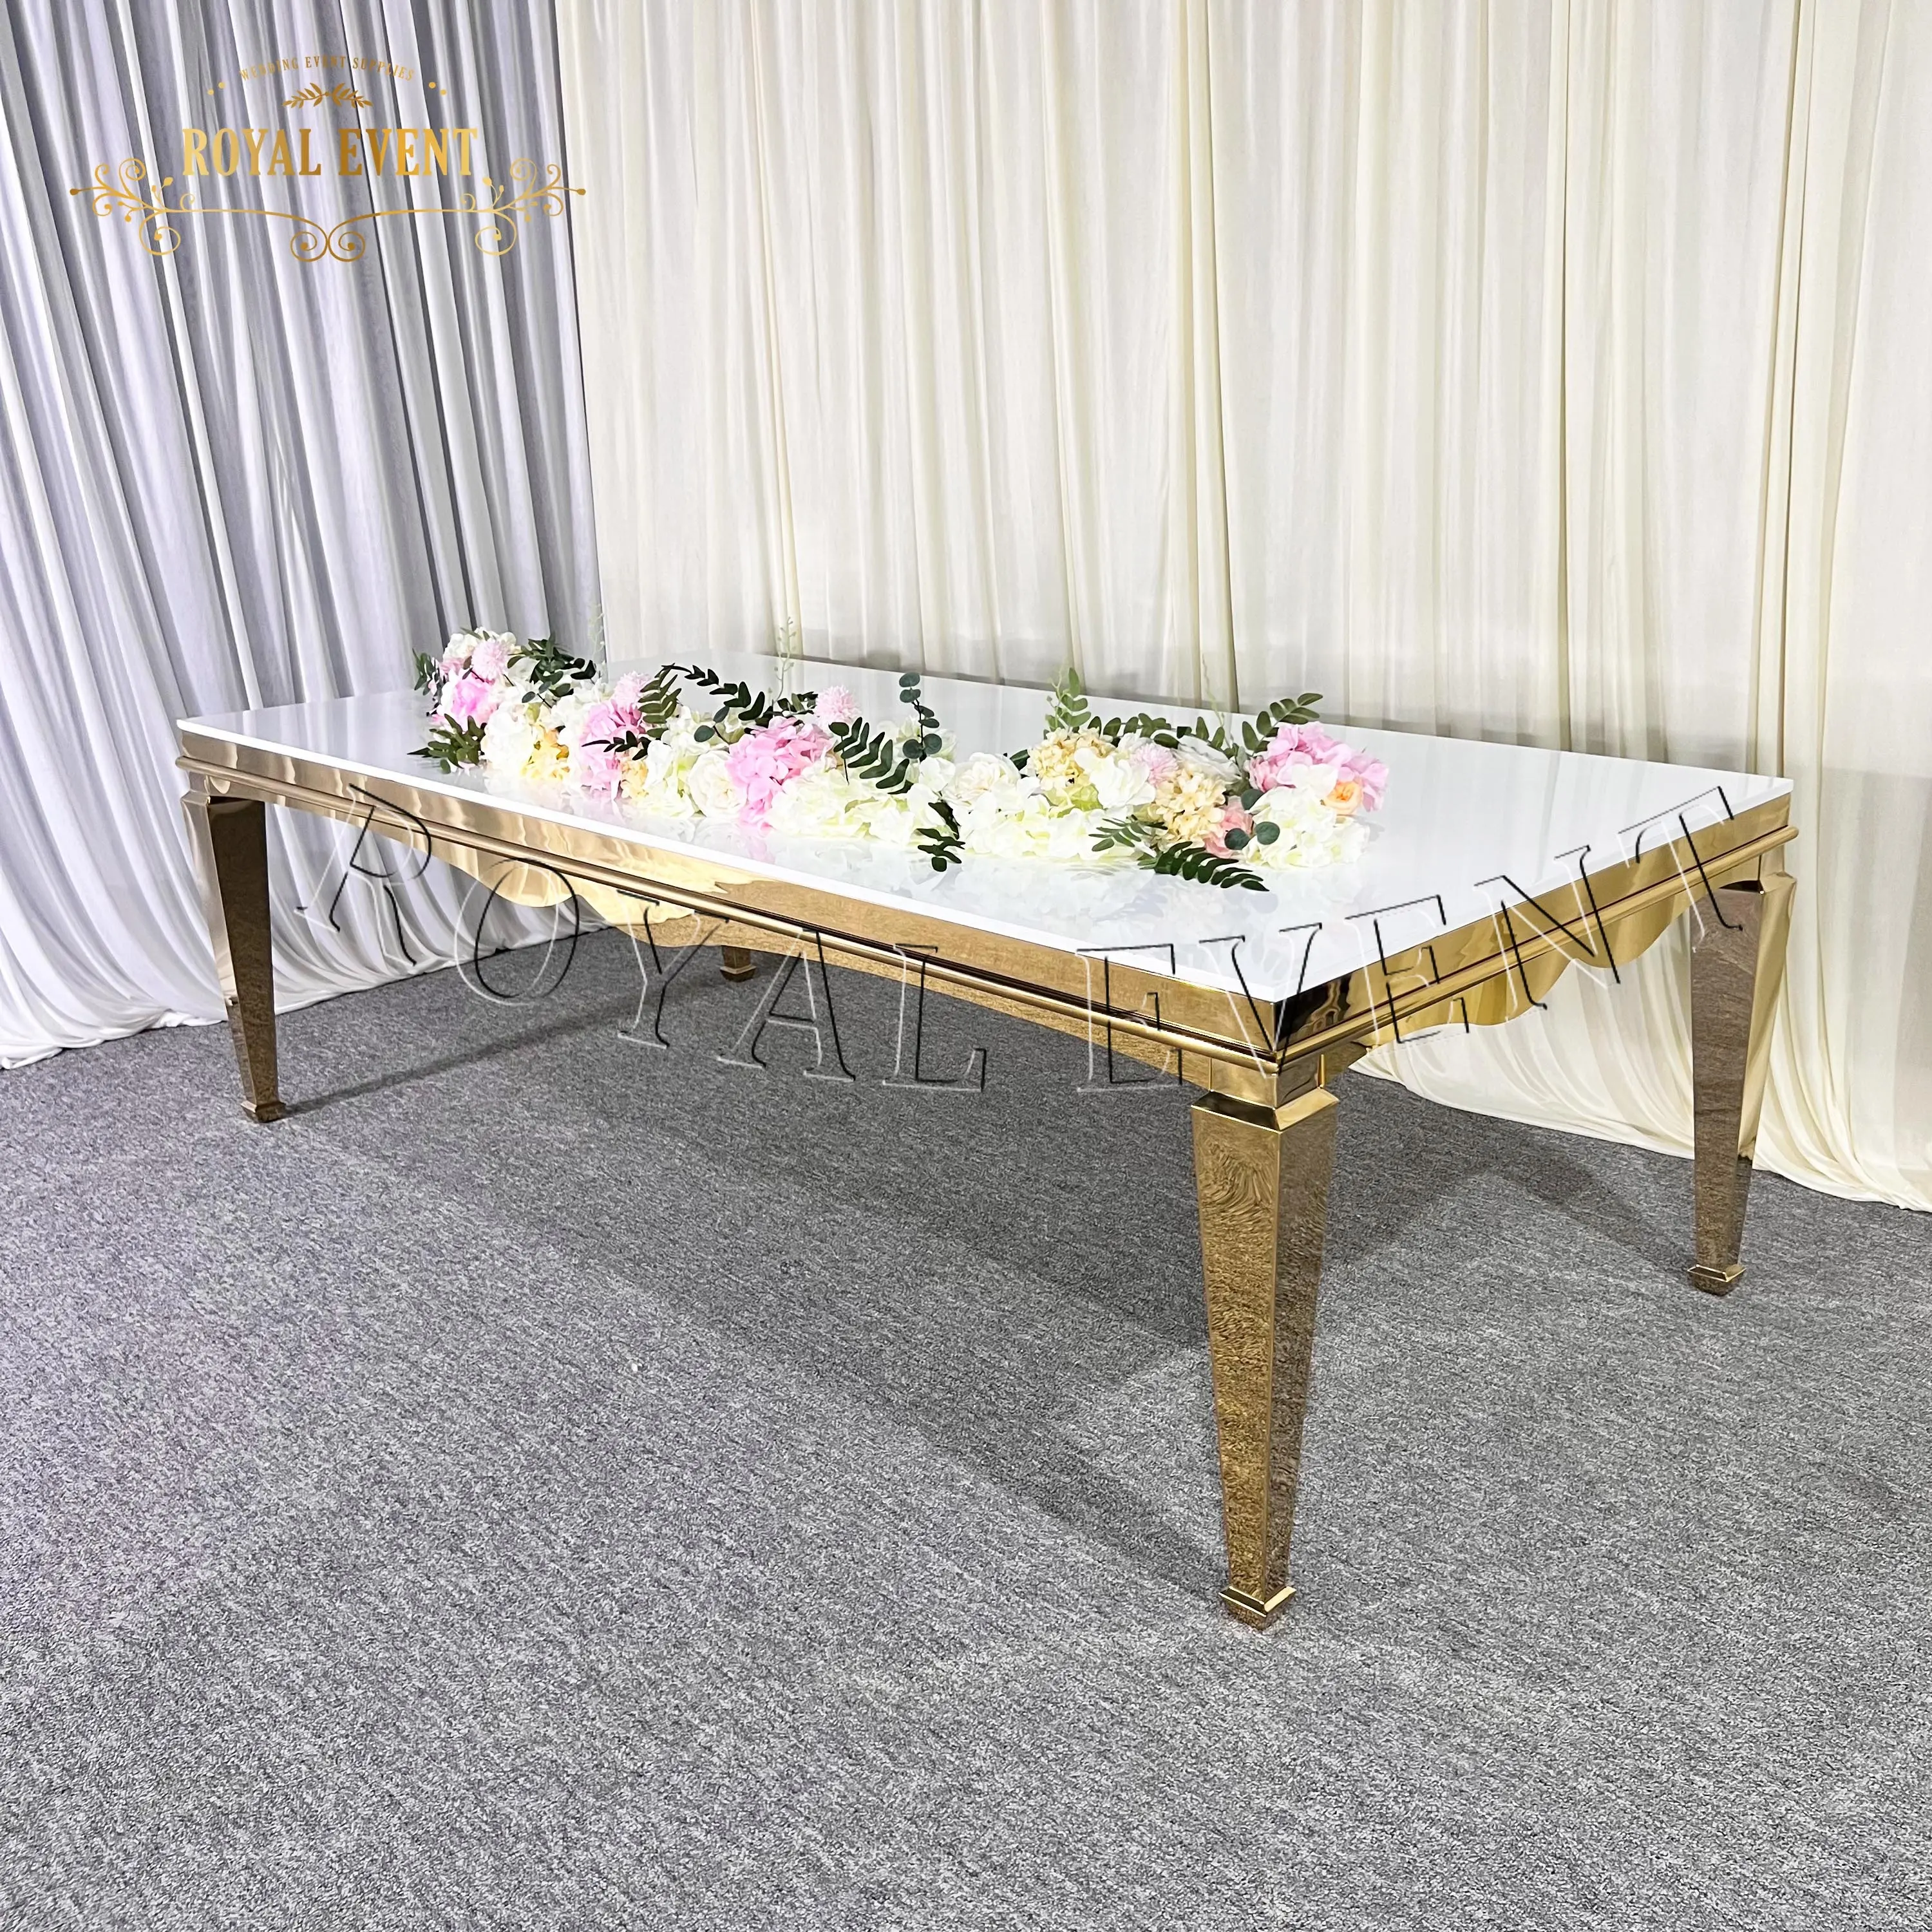 Wholesale Rectangle Stainless Steel Wedding Tables Elegant Glass Dining Table For Bride And Groom Used